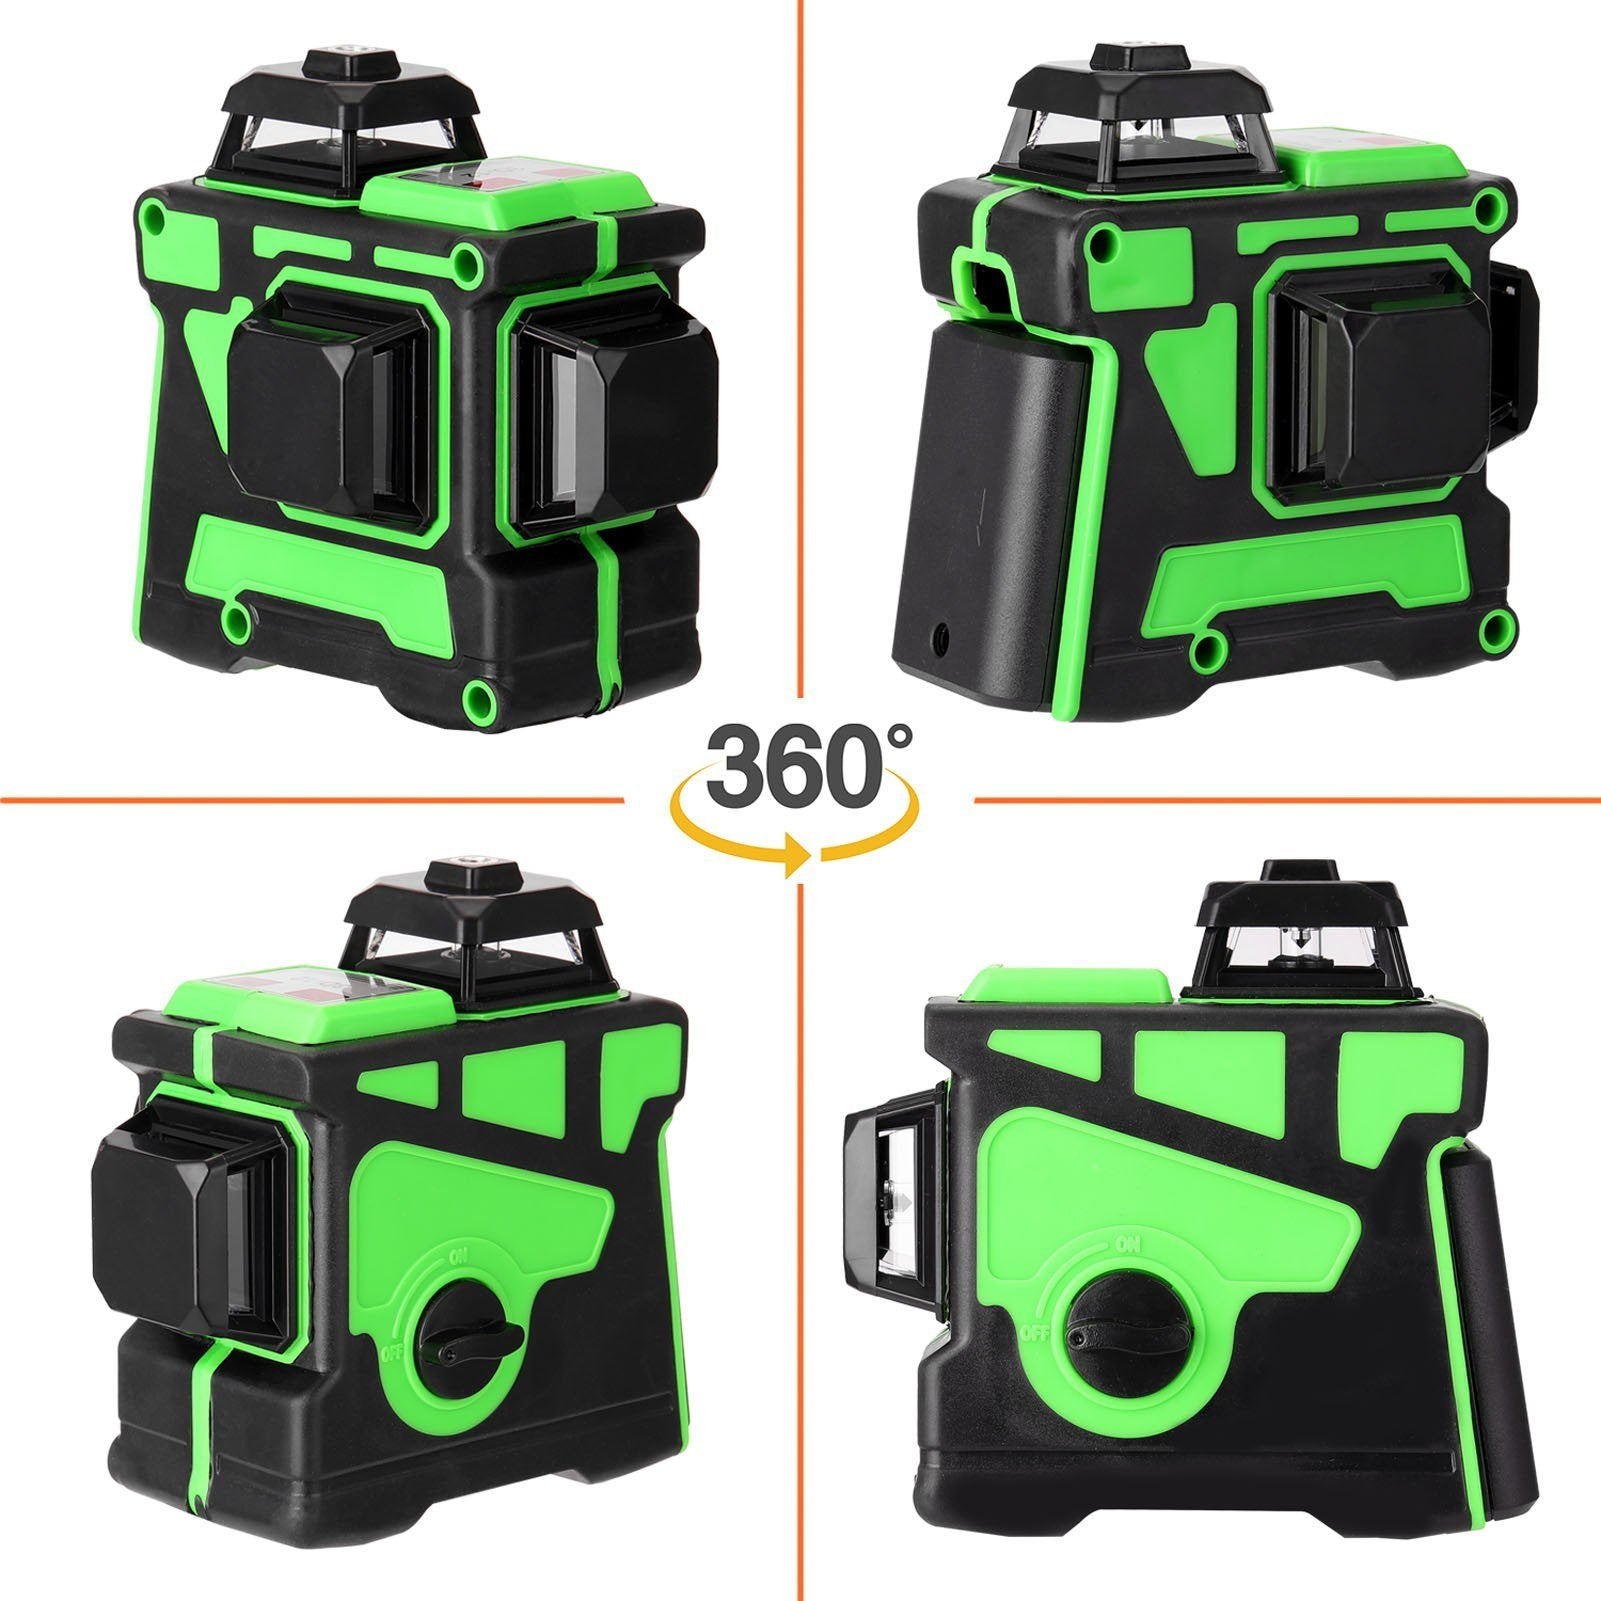 Multifunctional 3D 12 Lines Laser Level Tool Vertical Horizontal with Self-leveling Function